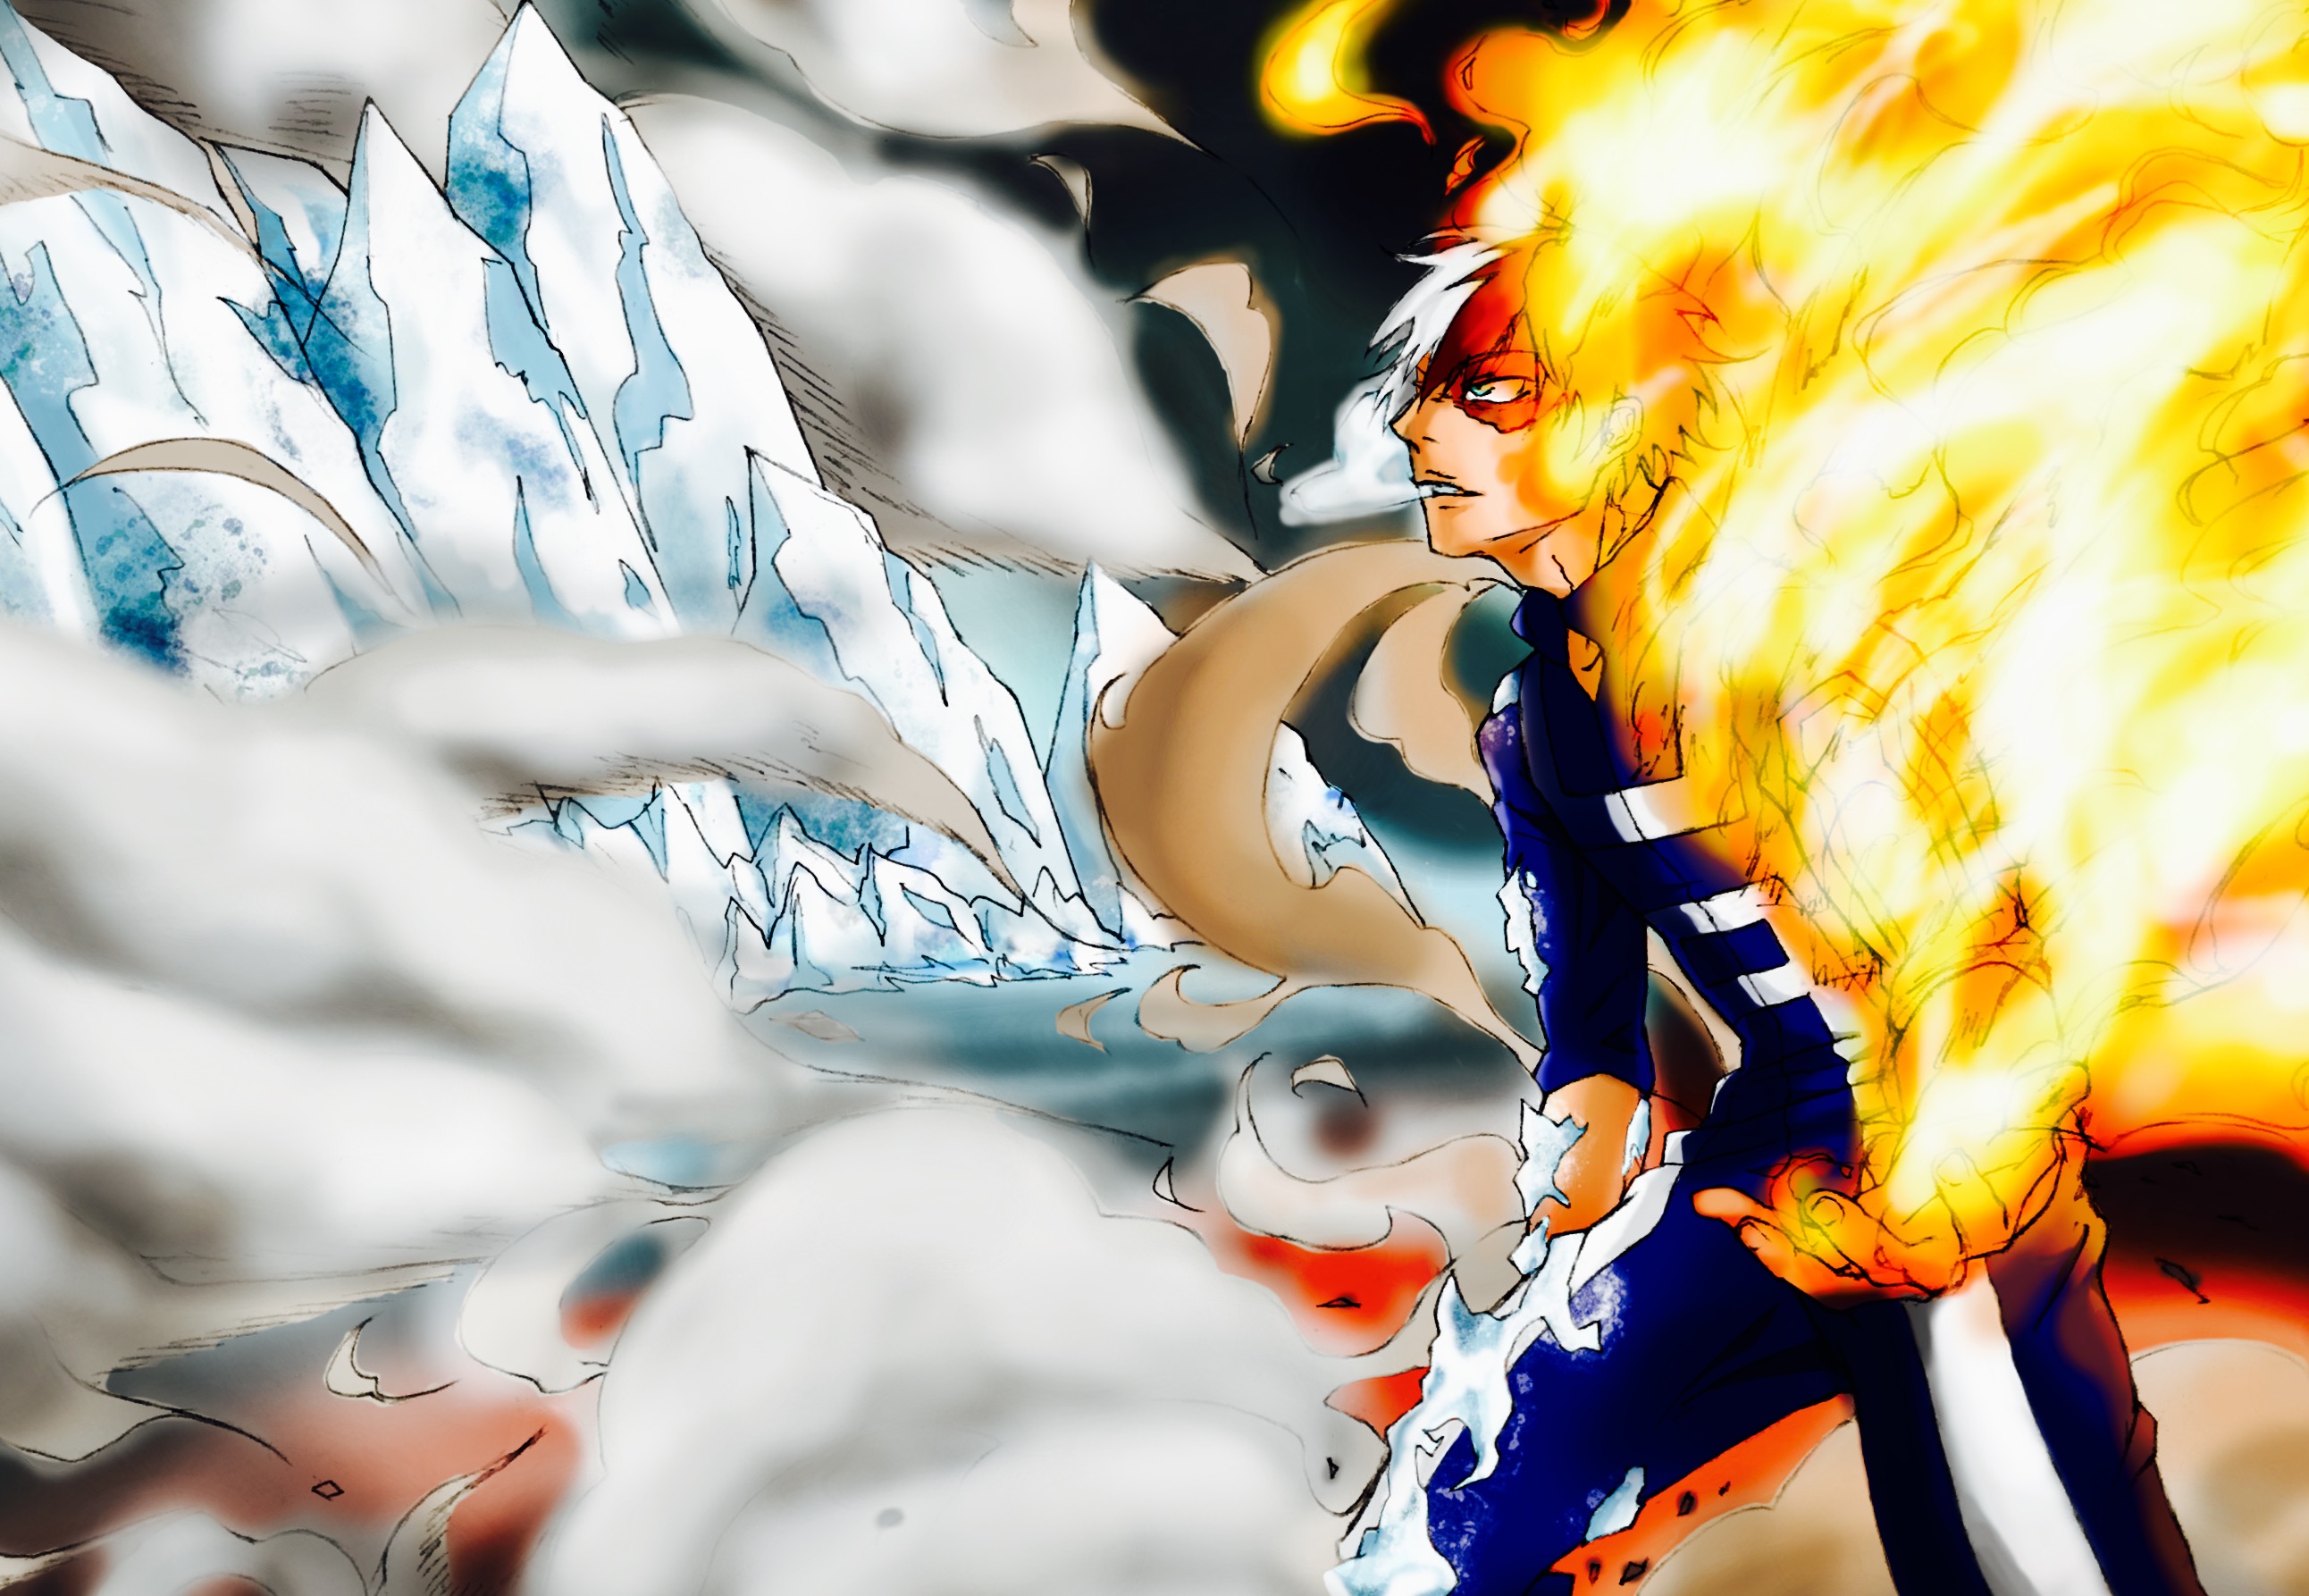 fire and ice  Other  Anime Background Wallpapers on Desktop Nexus Image  2319476